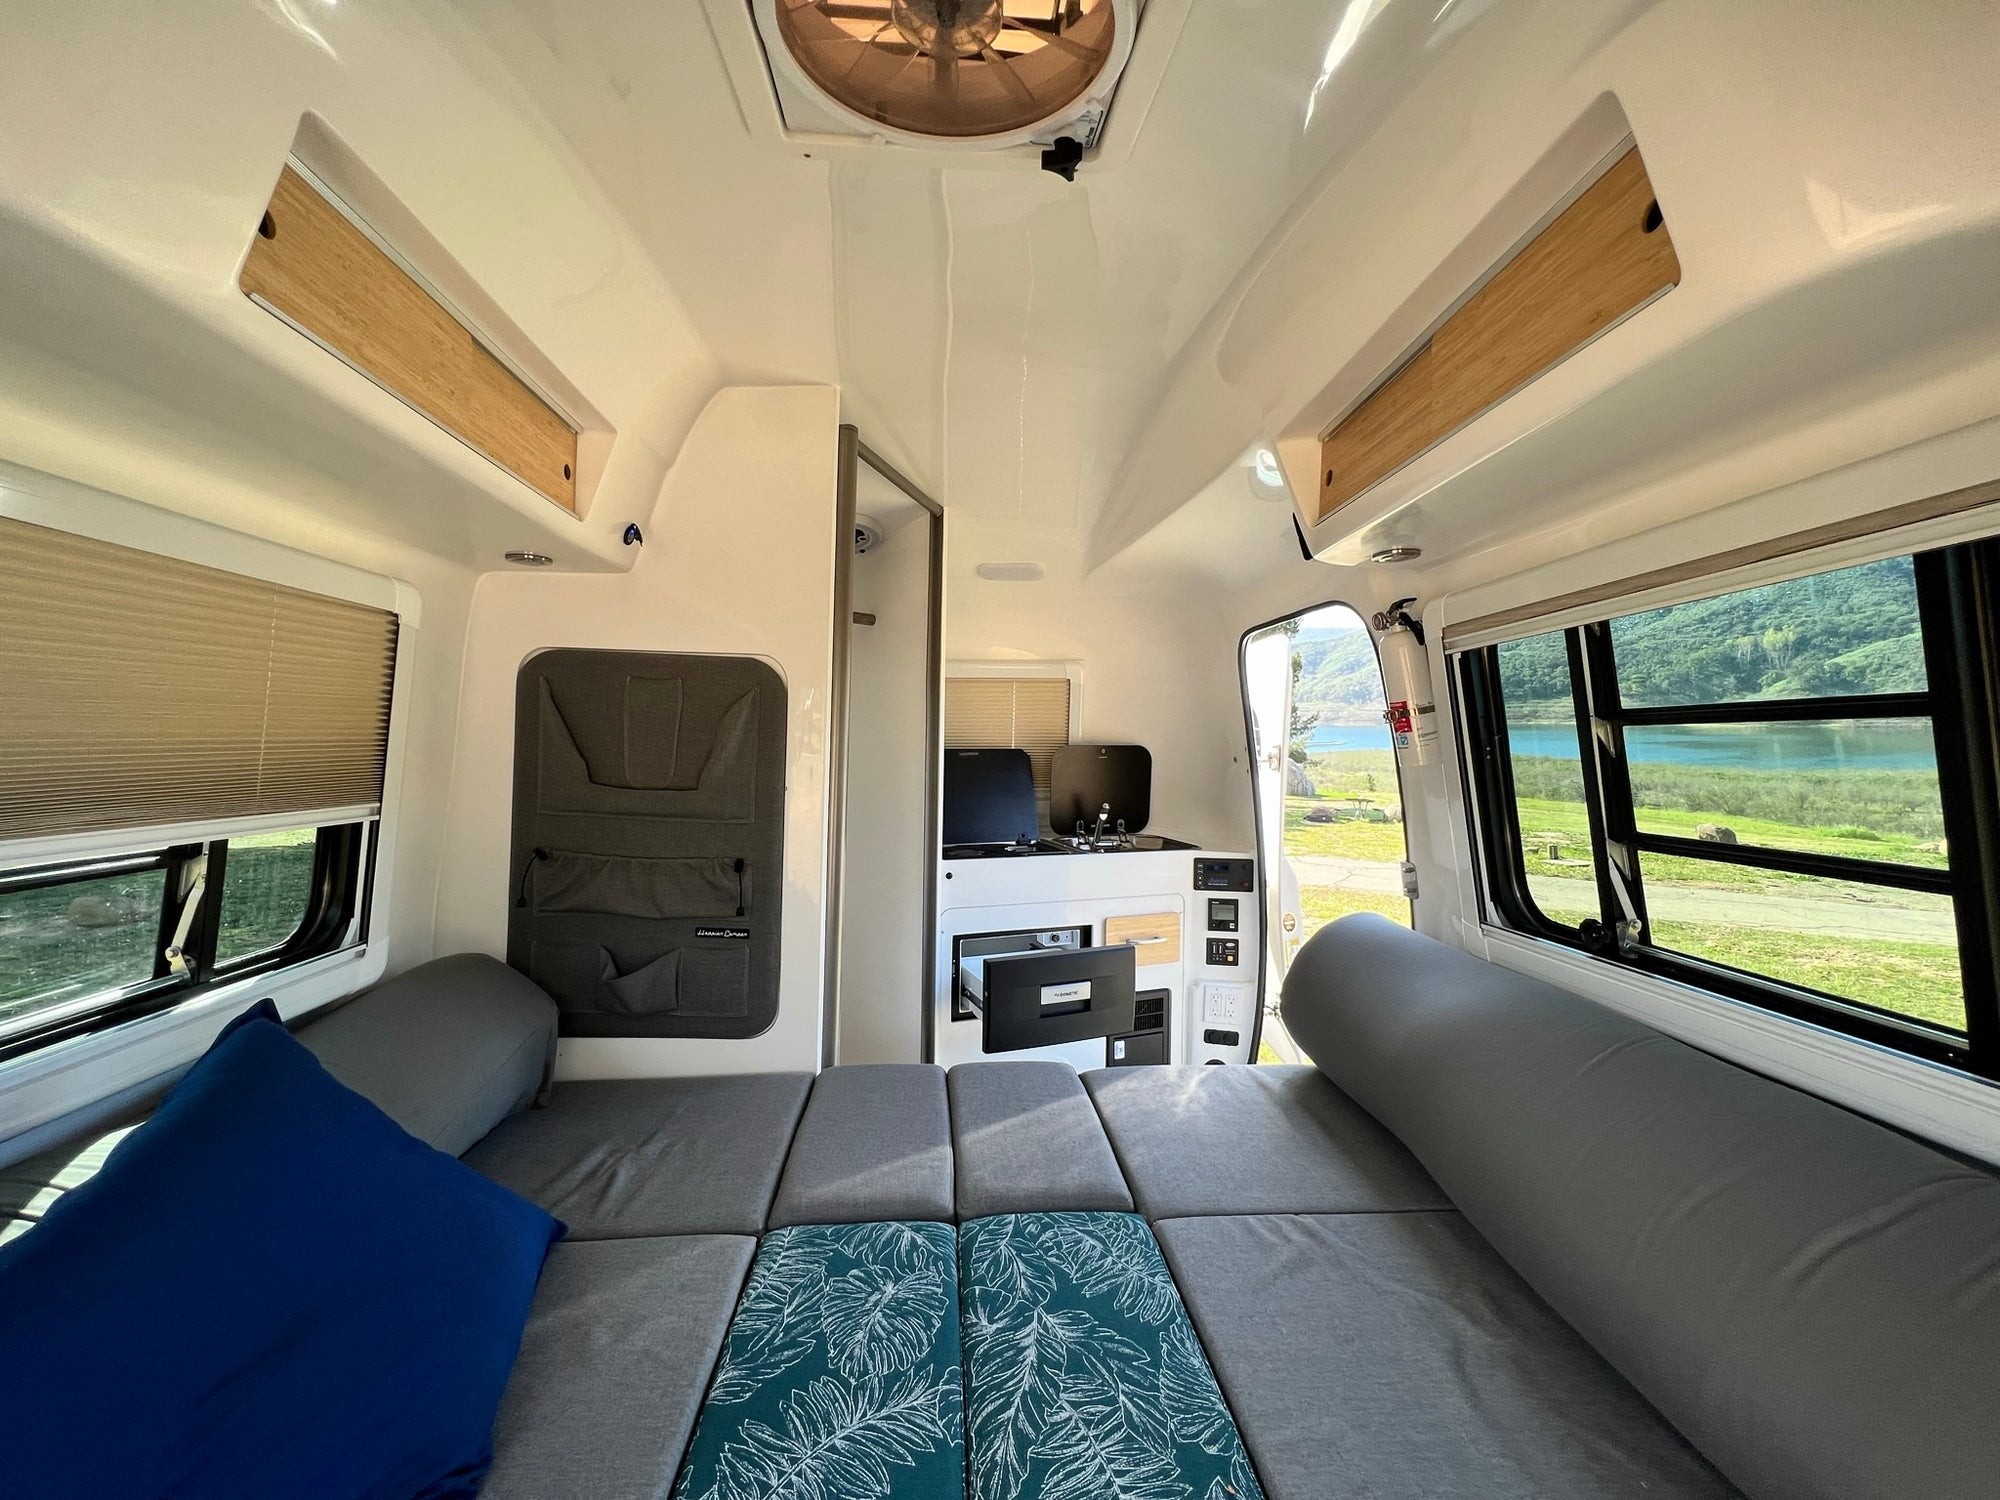 Happier Camper's 50K Studio RV Blasts Modularity to New Heights With